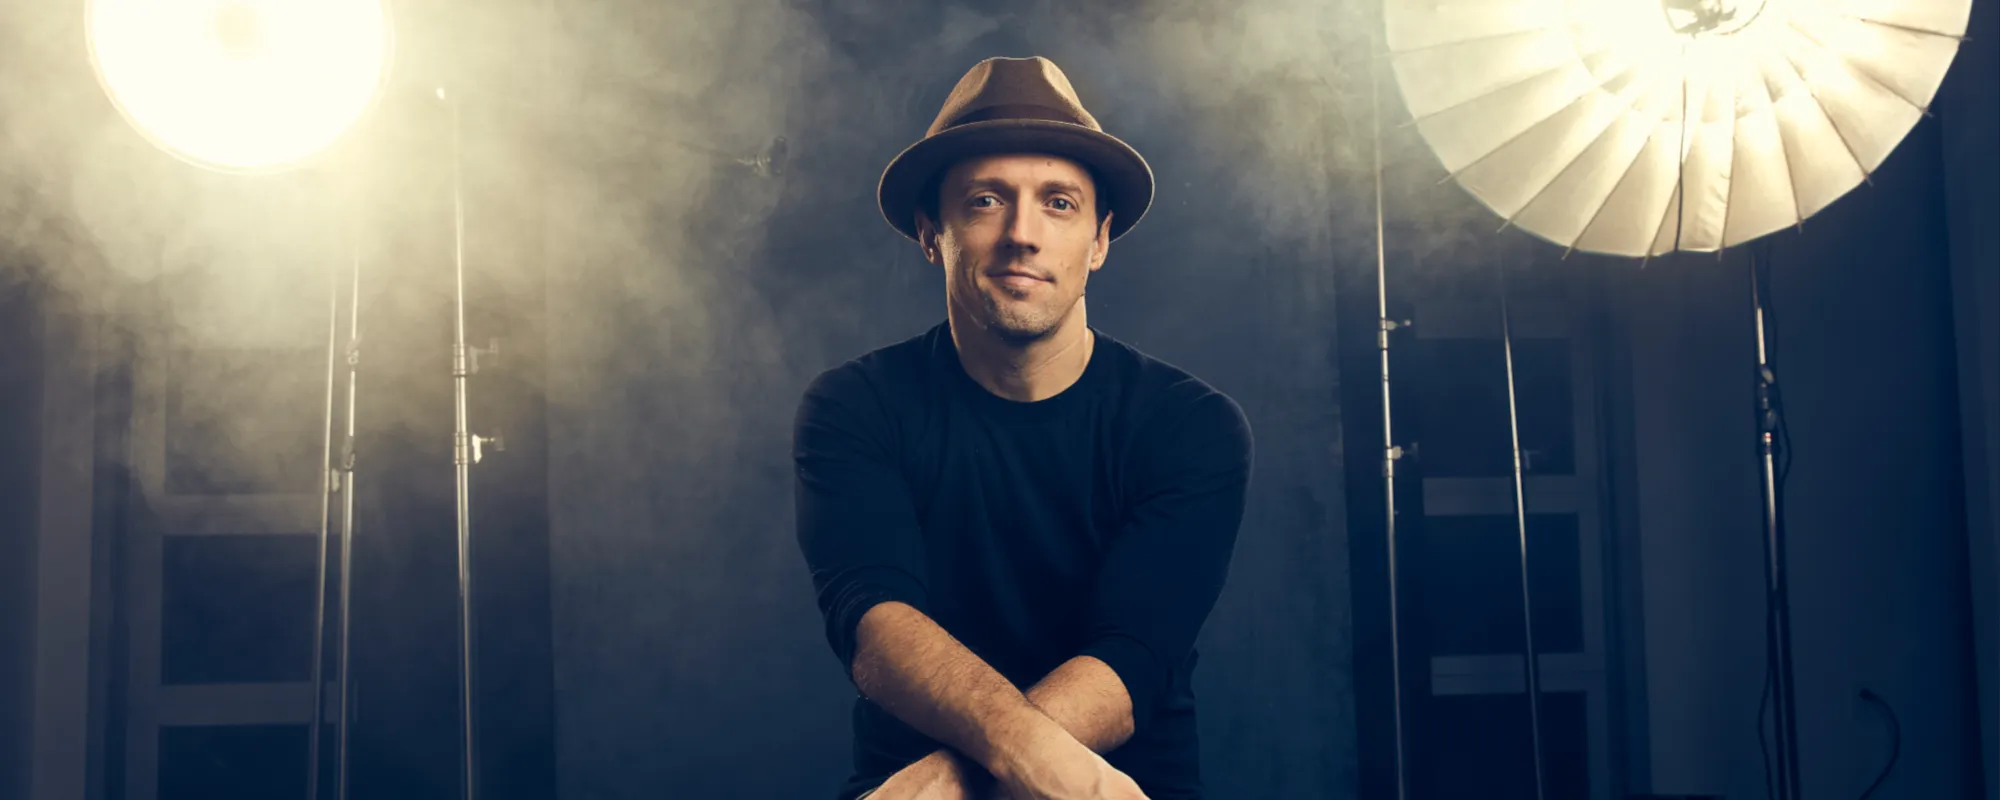 Jason Mraz to Release Collection of Love Songs, ‘Lalalalovesongs,’ Shares Story Behind Megahit “I’m Yours”